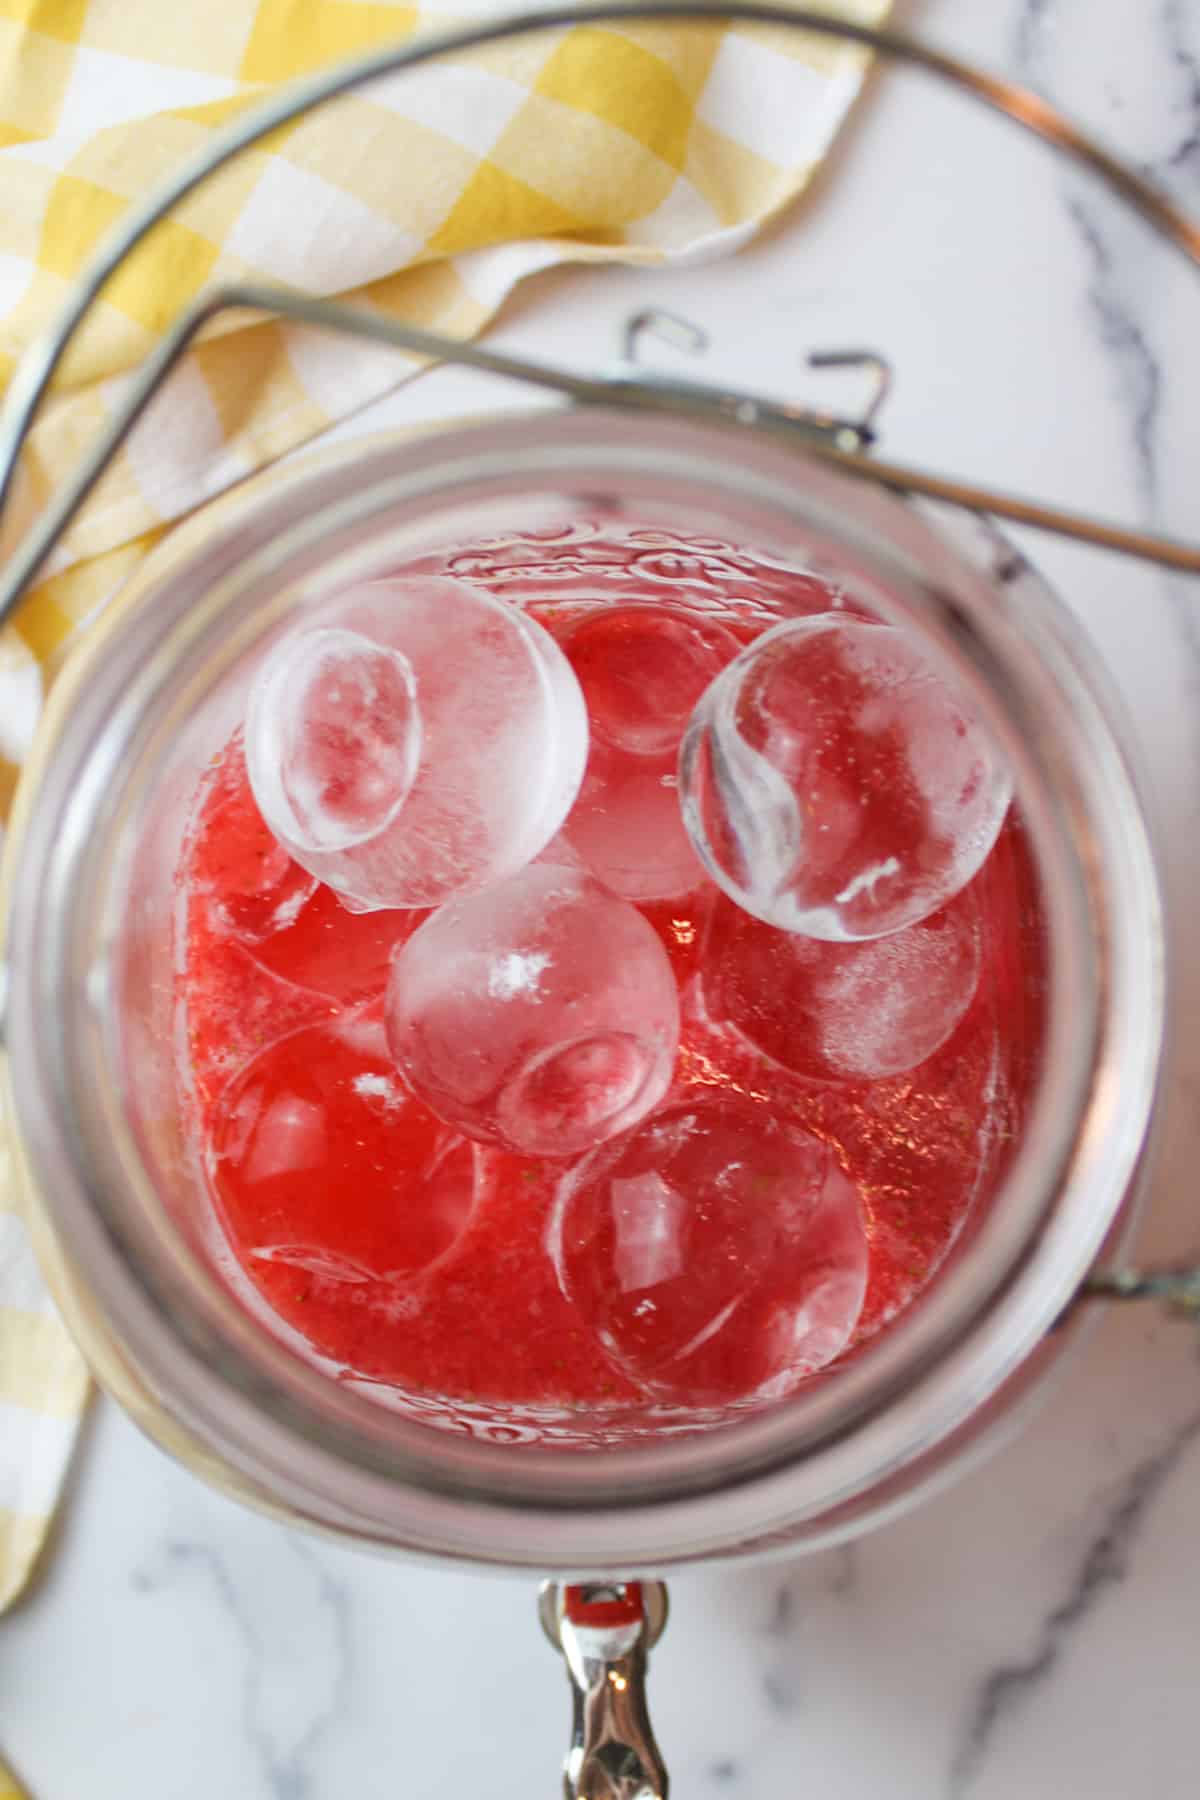 ice balls in a glass pitcher with strawberry puree and lemon jucie